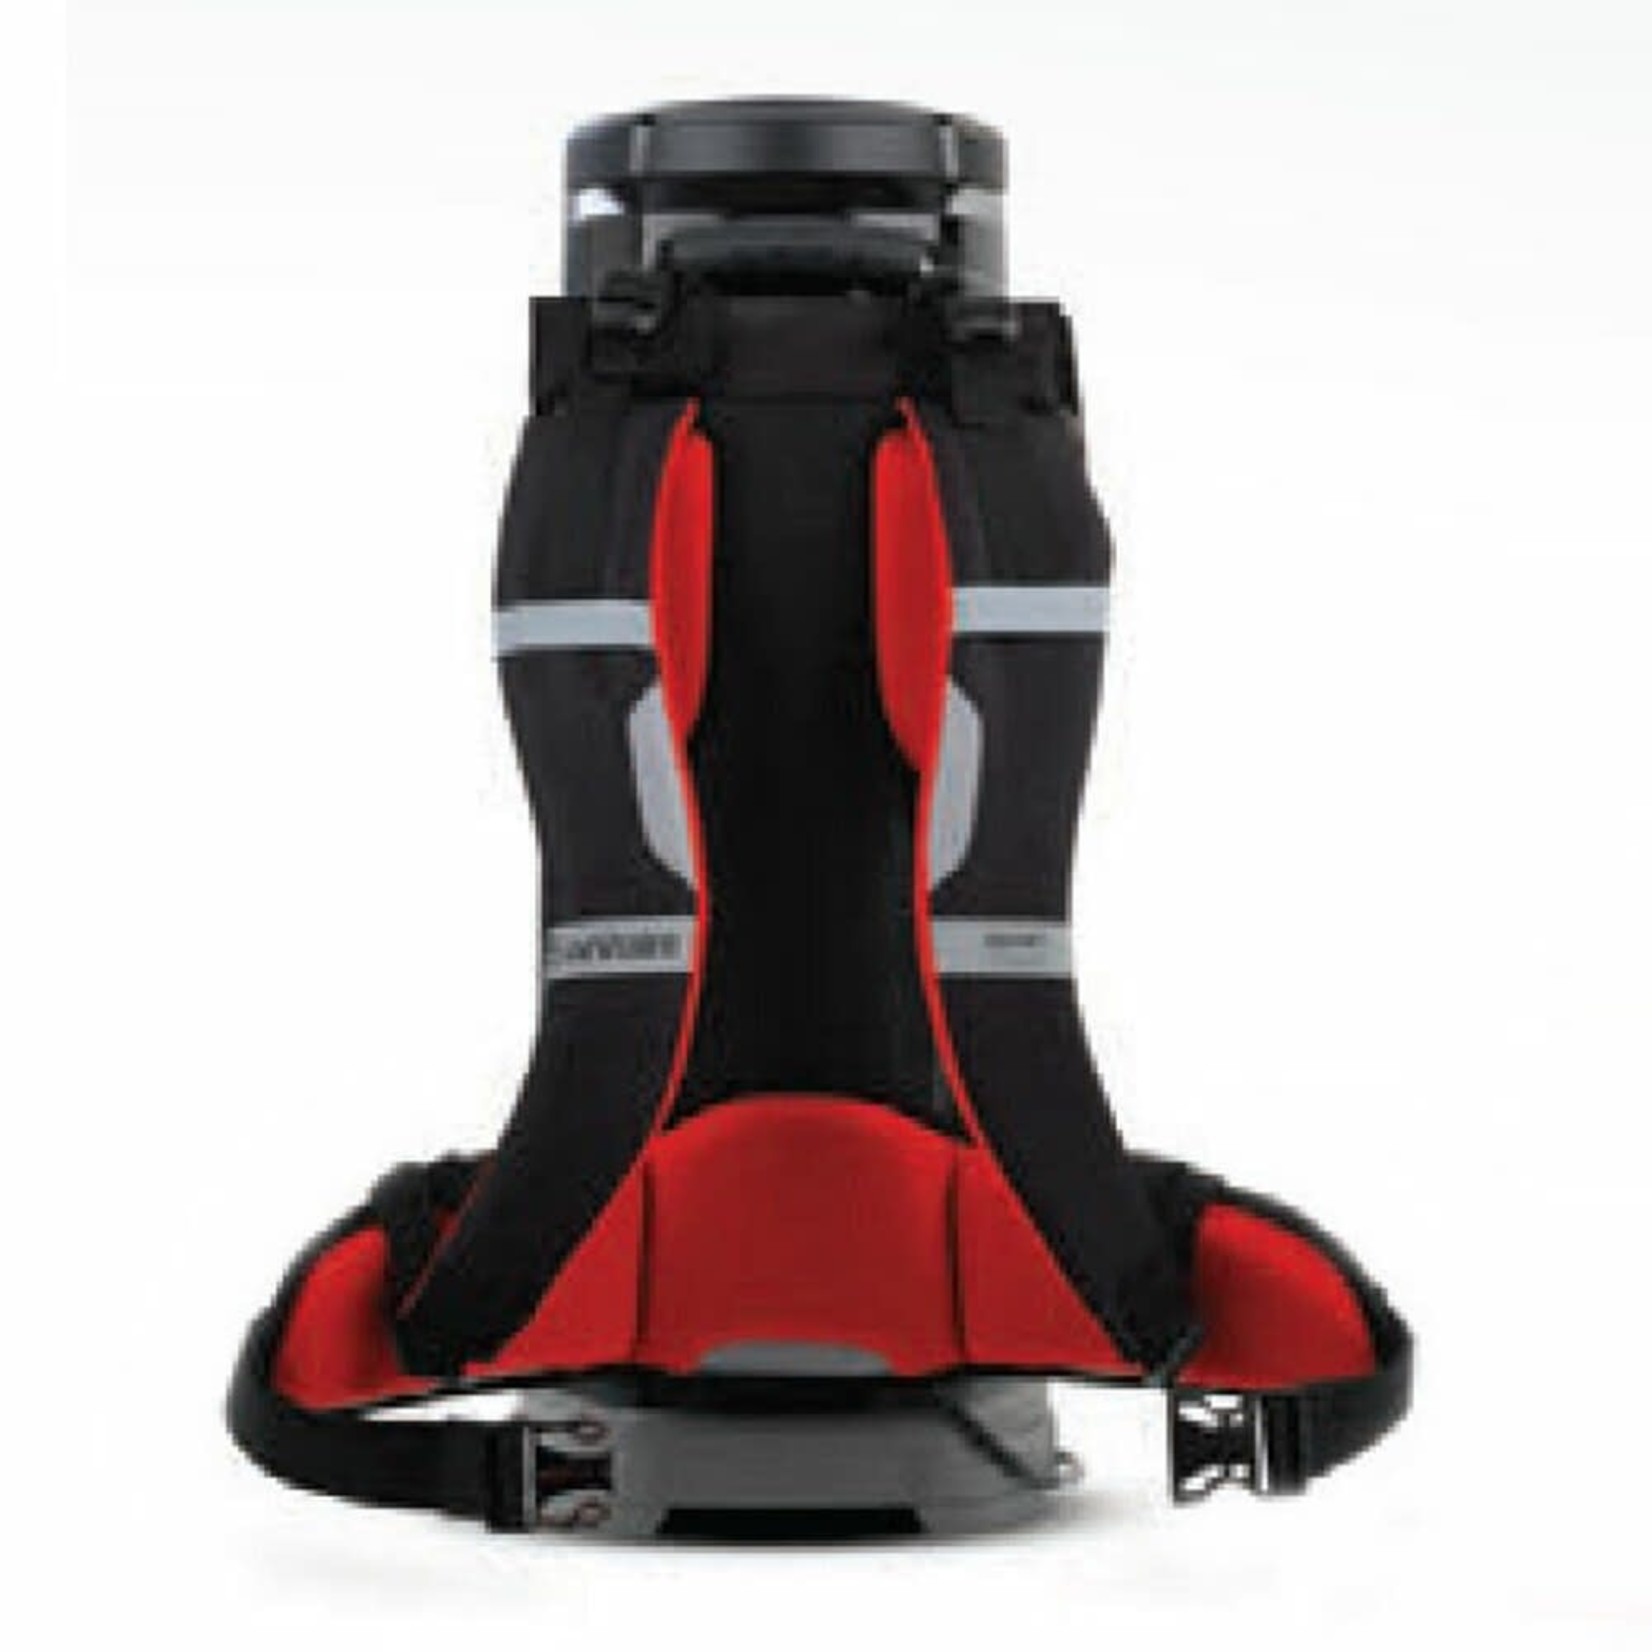 Sanitaire Sanitaire Commercial Backpack Transport Vacuum